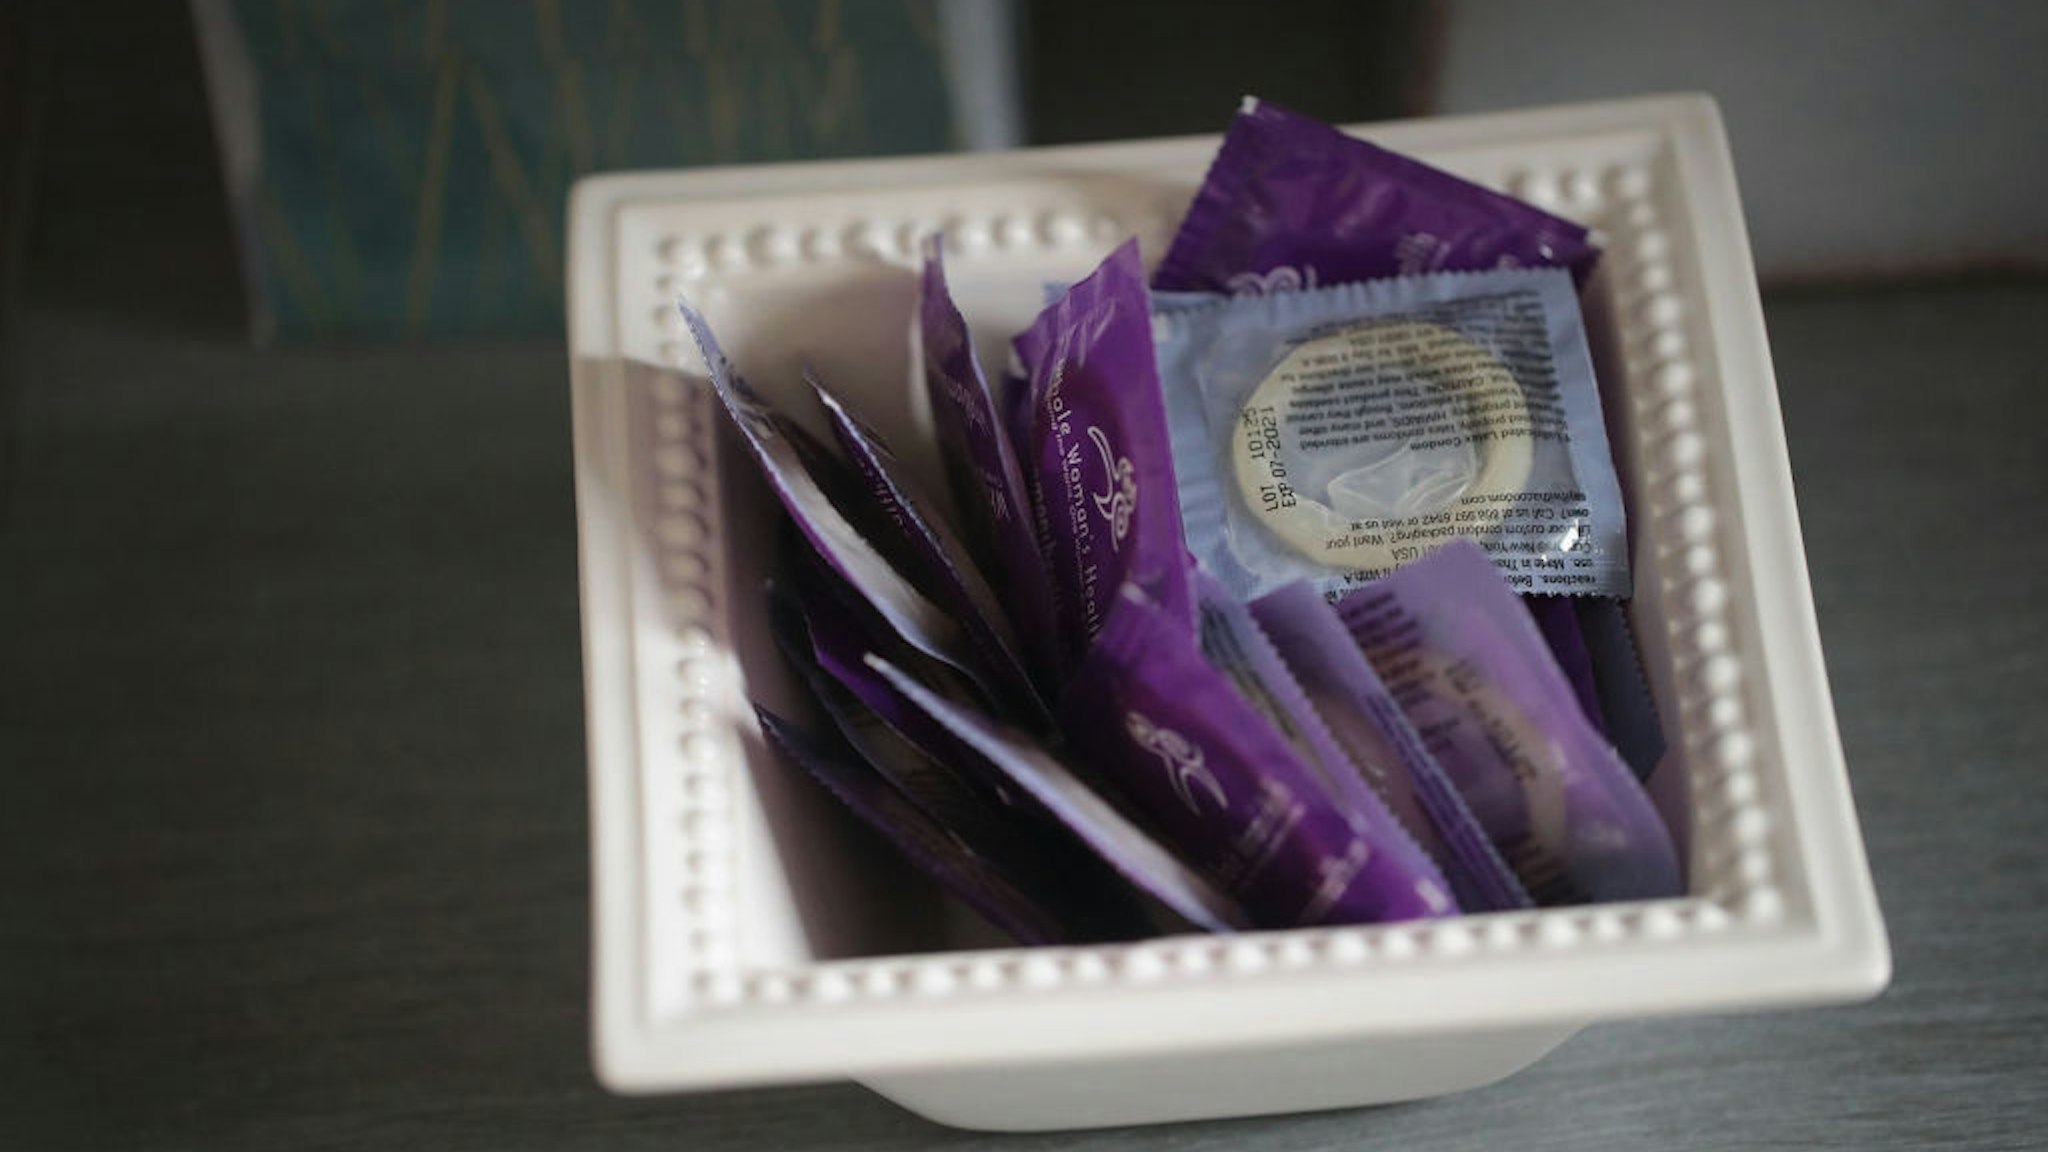 SOUTH BEND, INDIANA - JUNE 19: A bowl of condoms sit on a table in an examination room at Whole Woman's Health of South Bend on June 19, 2019 in South Bend, Indiana. The clinic, which provides reproductive healthcare for women including providing abortions is scheduled to open next week following a nearly two-year court battle. Part of the Texas-based nonprofit Whole Woman's Health Alliance, the clinic will offer medication-induced abortions for women who are up to 10 weeks pregnant.